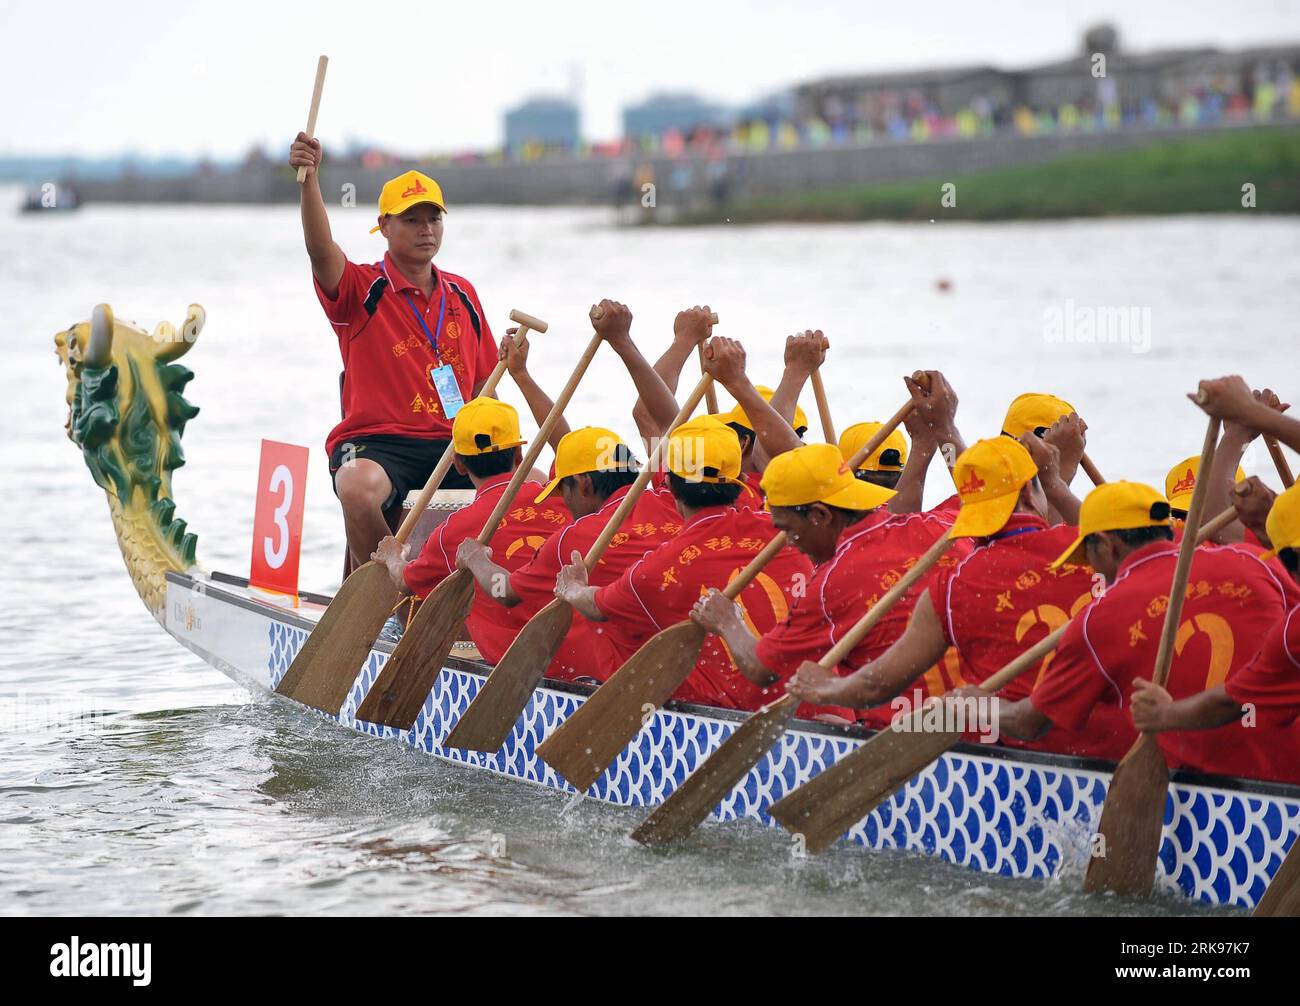 Bildnummer: 54148517  Datum: 16.06.2010  Copyright: imago/Xinhua (100616) -- HAIKOU, June 16, 2010 (Xinhua) -- Participants compete in a dragon boat race in Chengmai, a county in south China s Hainan Province, June 16, 2010. Twelve teams from all over the country took part in the event to mark the Chinese traditional Dragon Boat Festival. (Xinhua/Guo Cheng)(zl) (4)CHINA-HAINAN-DRAGON BOAT RACE (CN) PUBLICATIONxNOTxINxCHN Gesellschaft China Drachenboot Festival kbdig xcb 2010 quer o0 Rennen Drachenbootrennen Boot    Bildnummer 54148517 Date 16 06 2010 Copyright Imago XINHUA  Haikou June 16 2010 Stock Photo